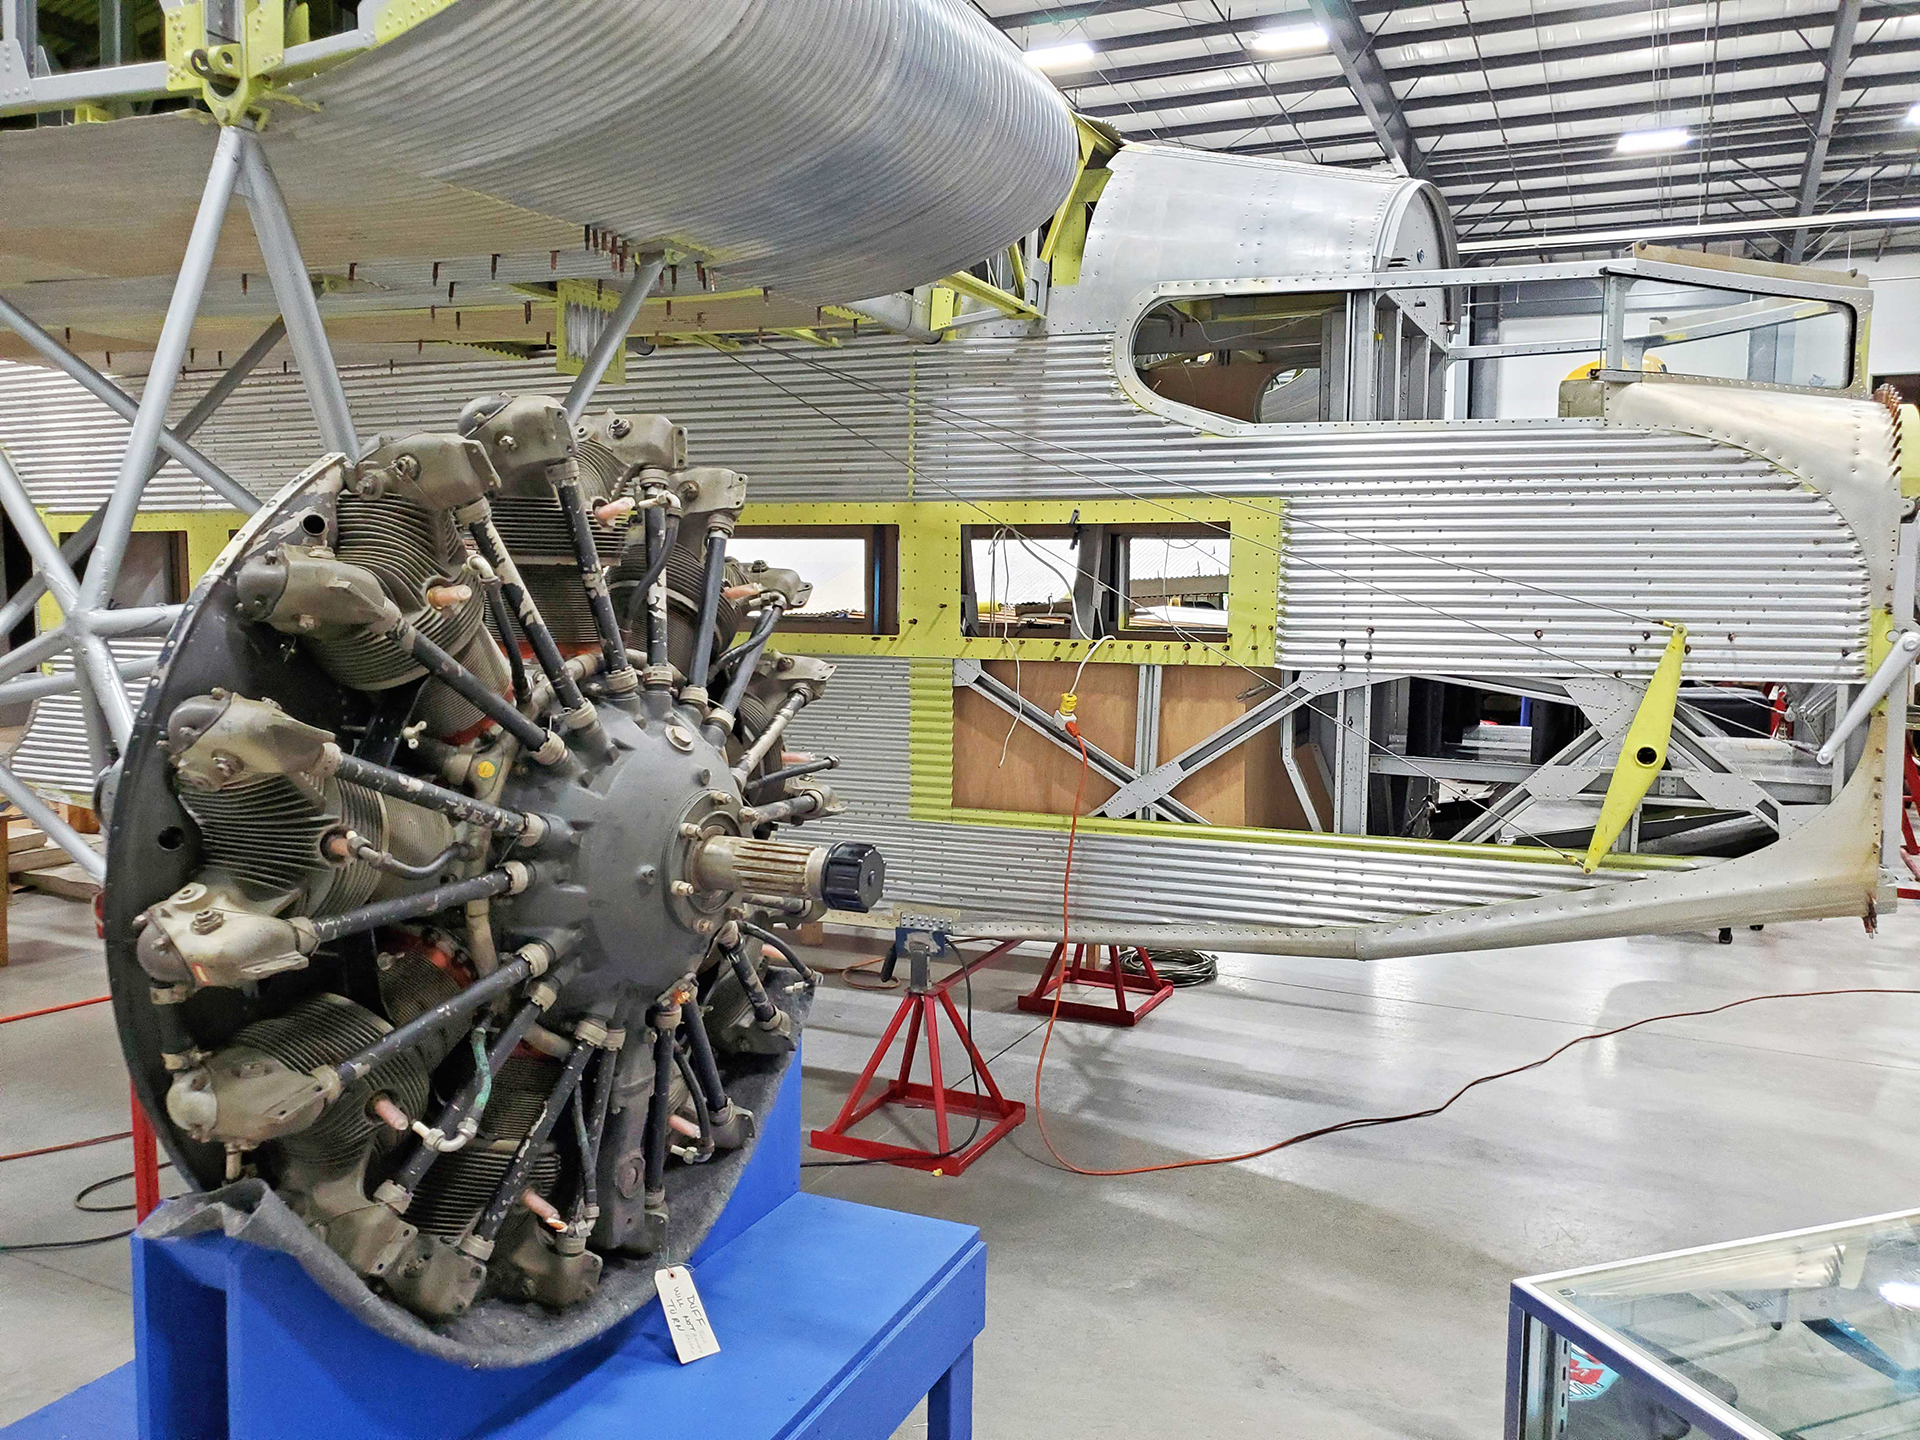 This Port Clinton, OH Ford Tri-Motor Project Will Bring Aviation History To Life